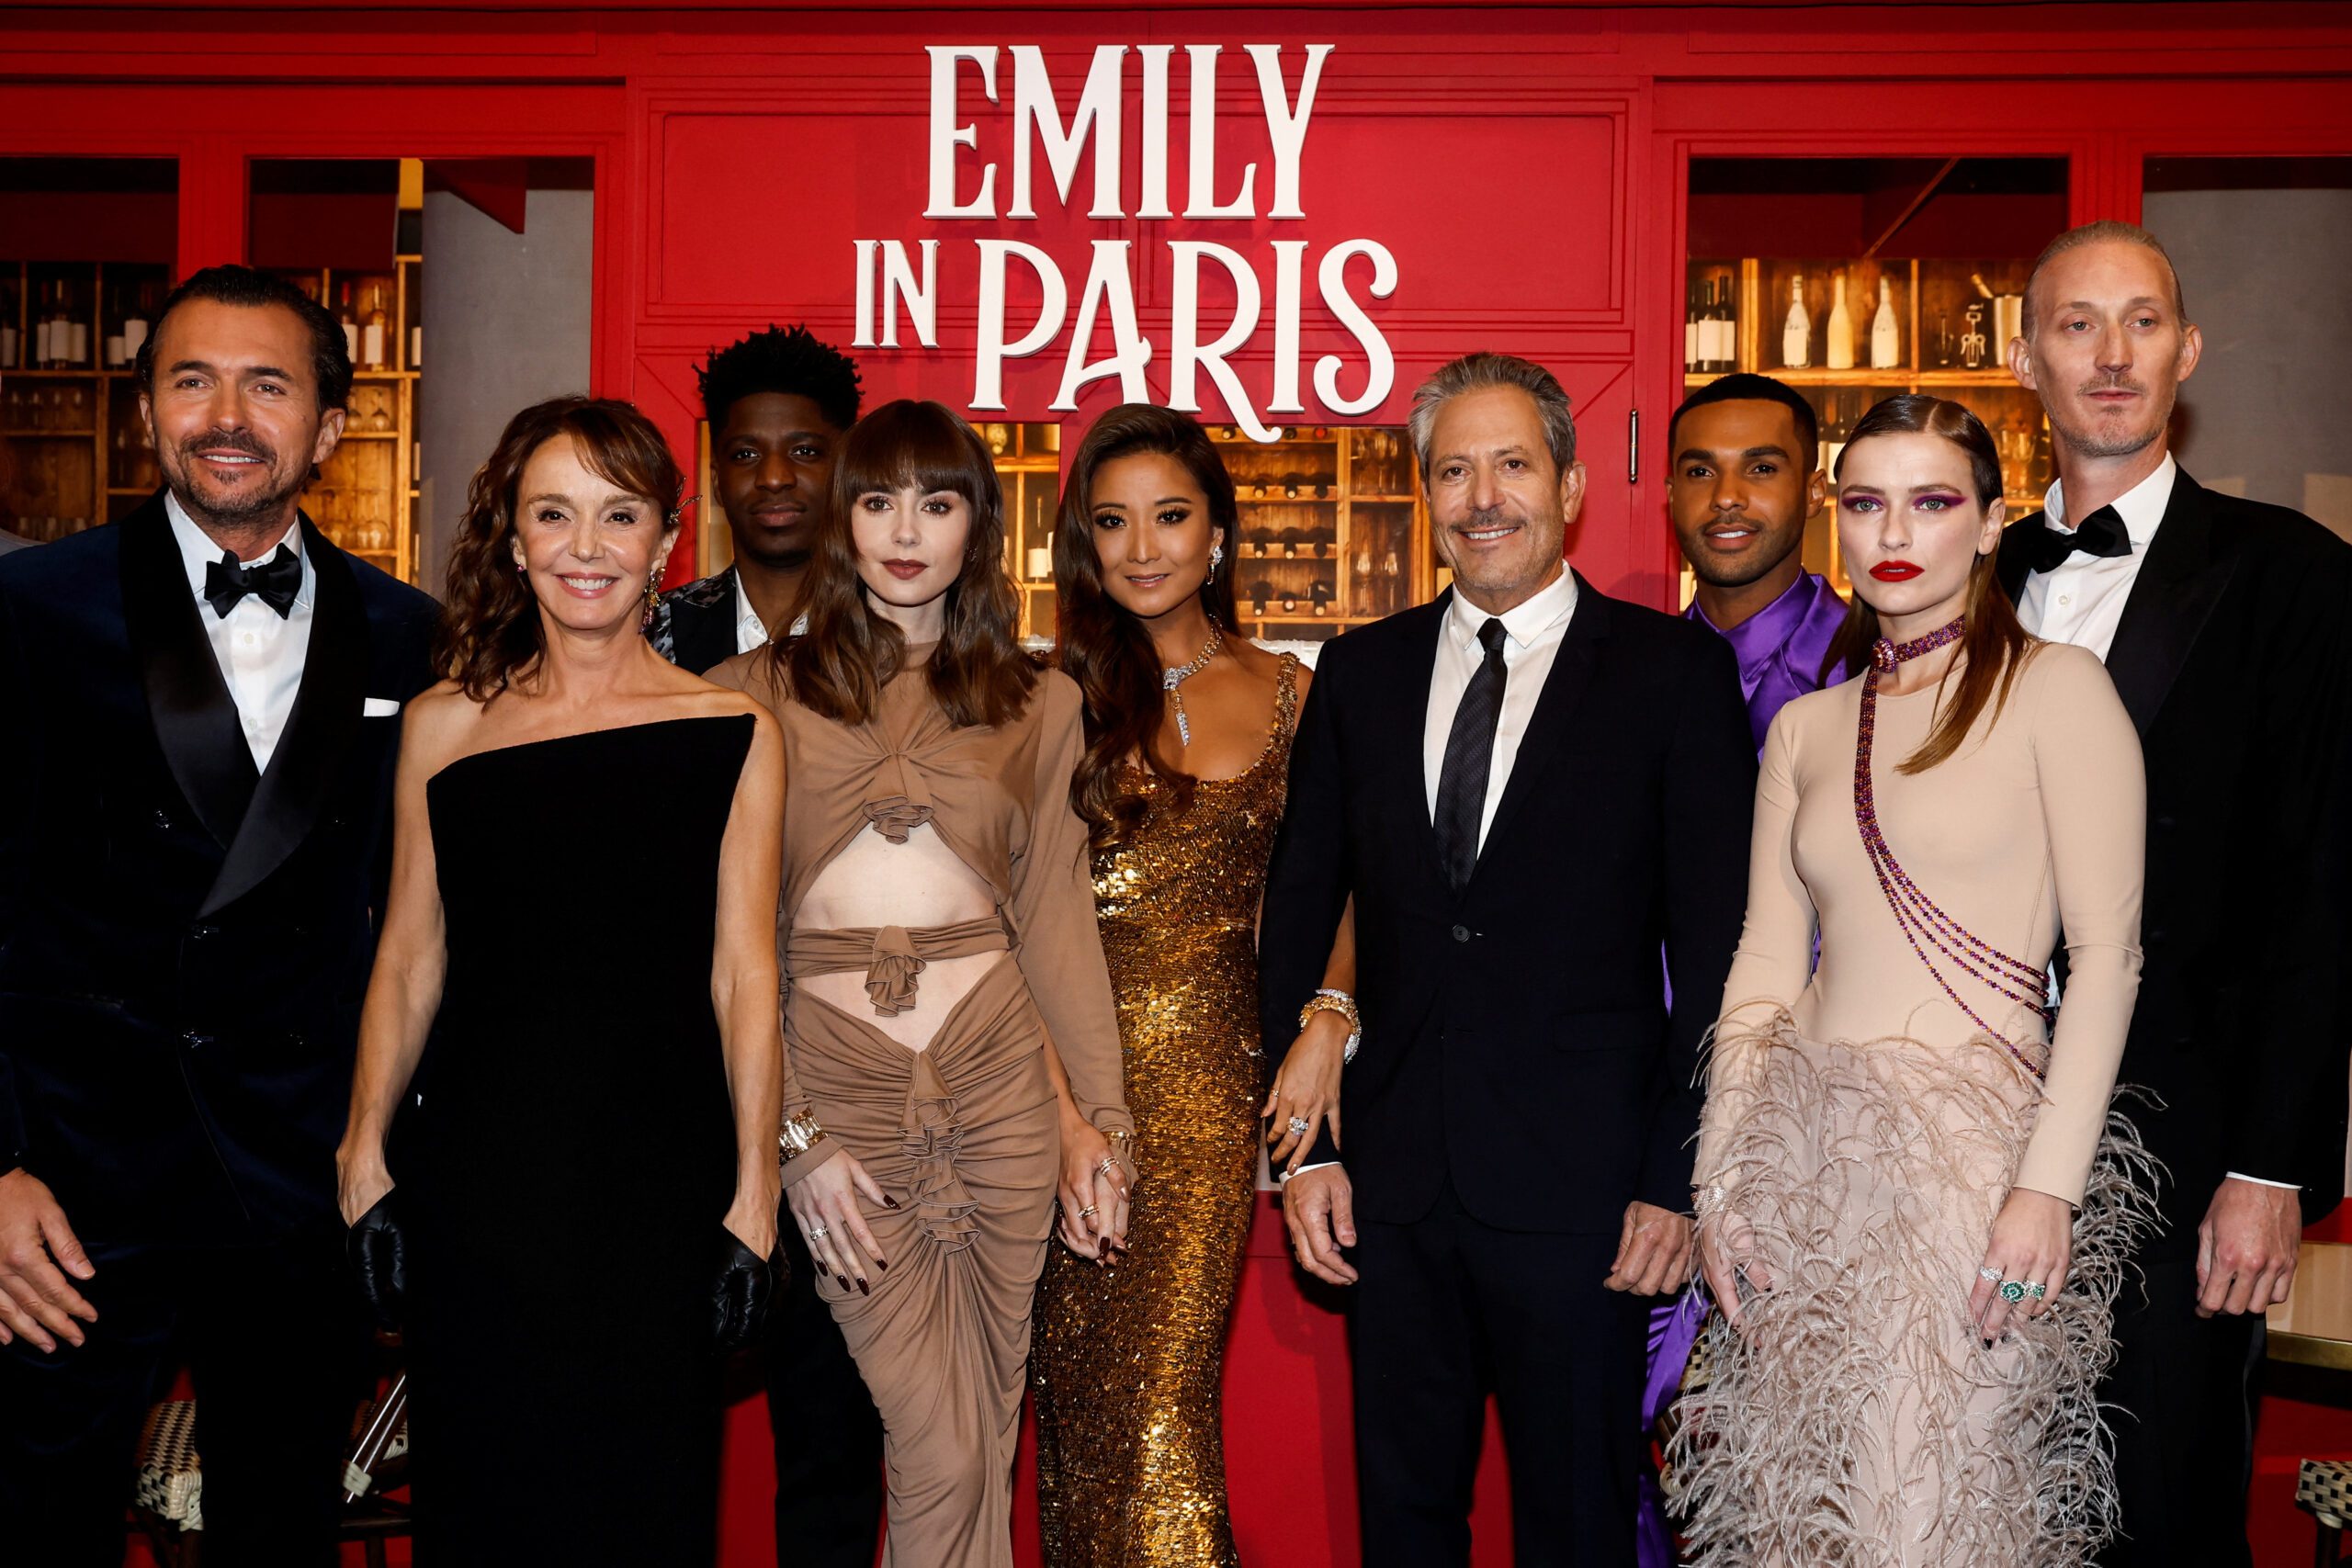 Netflix hit ‘Emily in Paris’ draws cast to French capital for global premiere